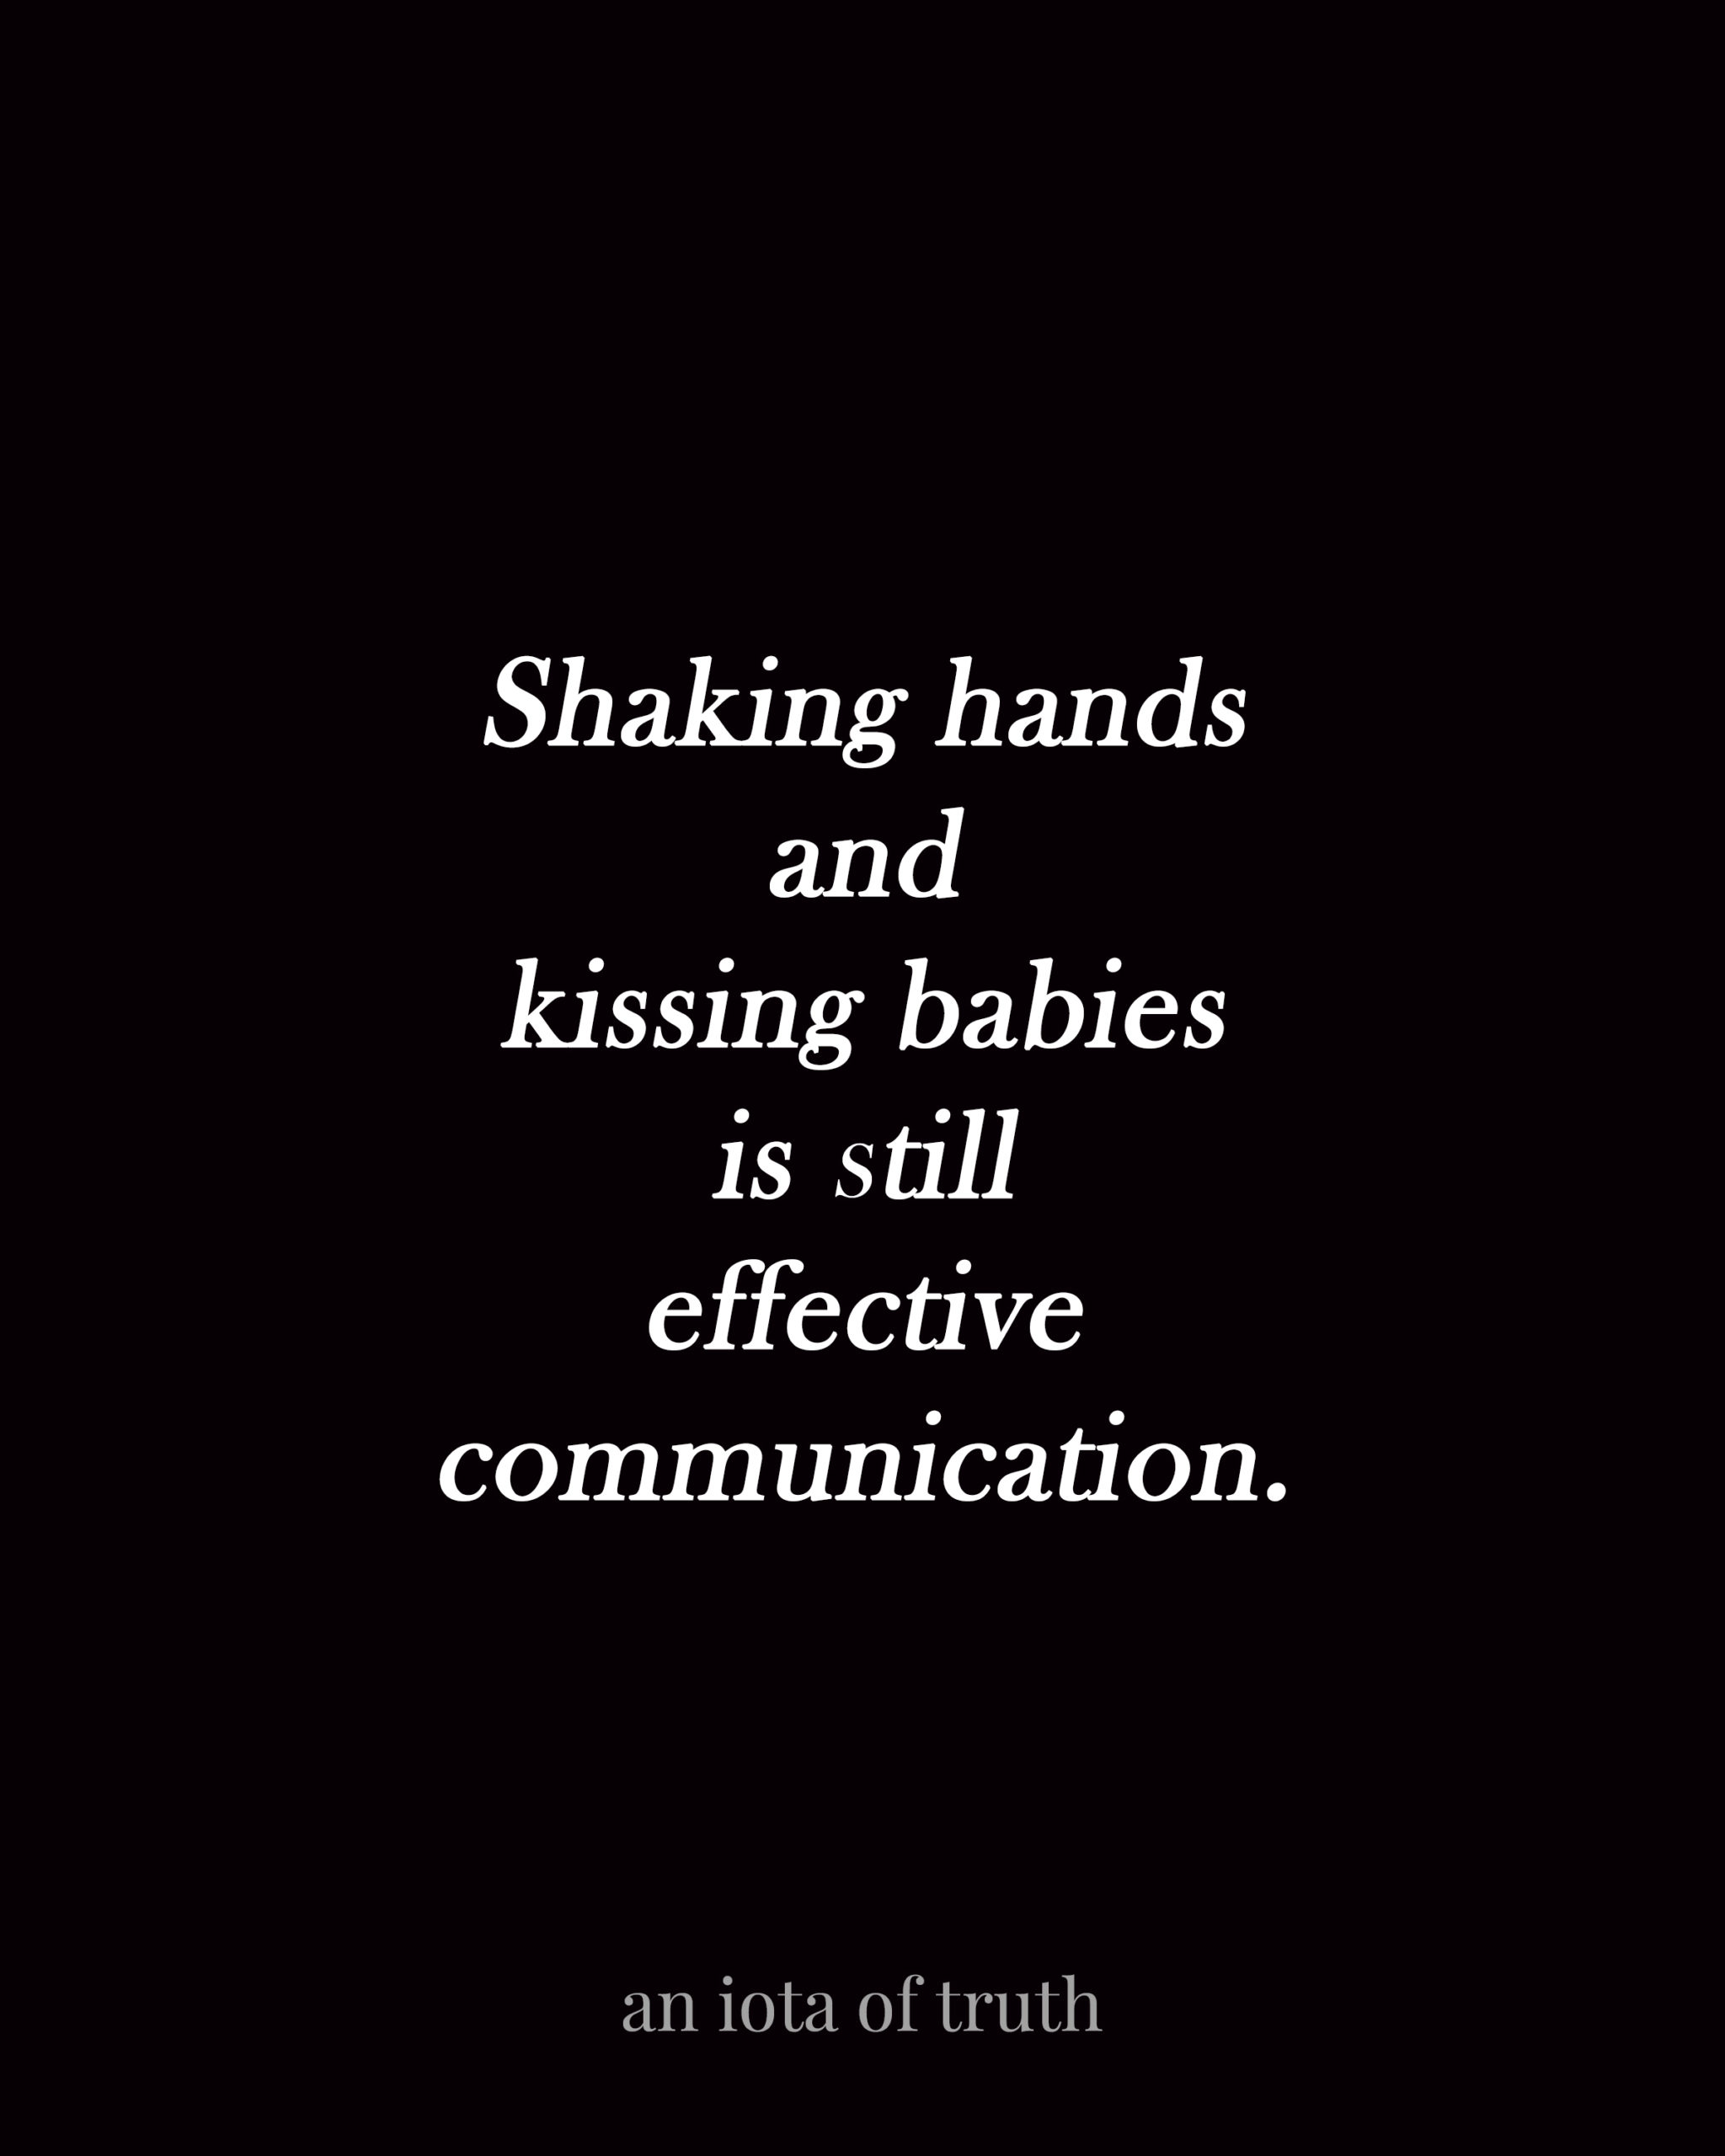 Shaking hands and kissing babies is still effective communication.